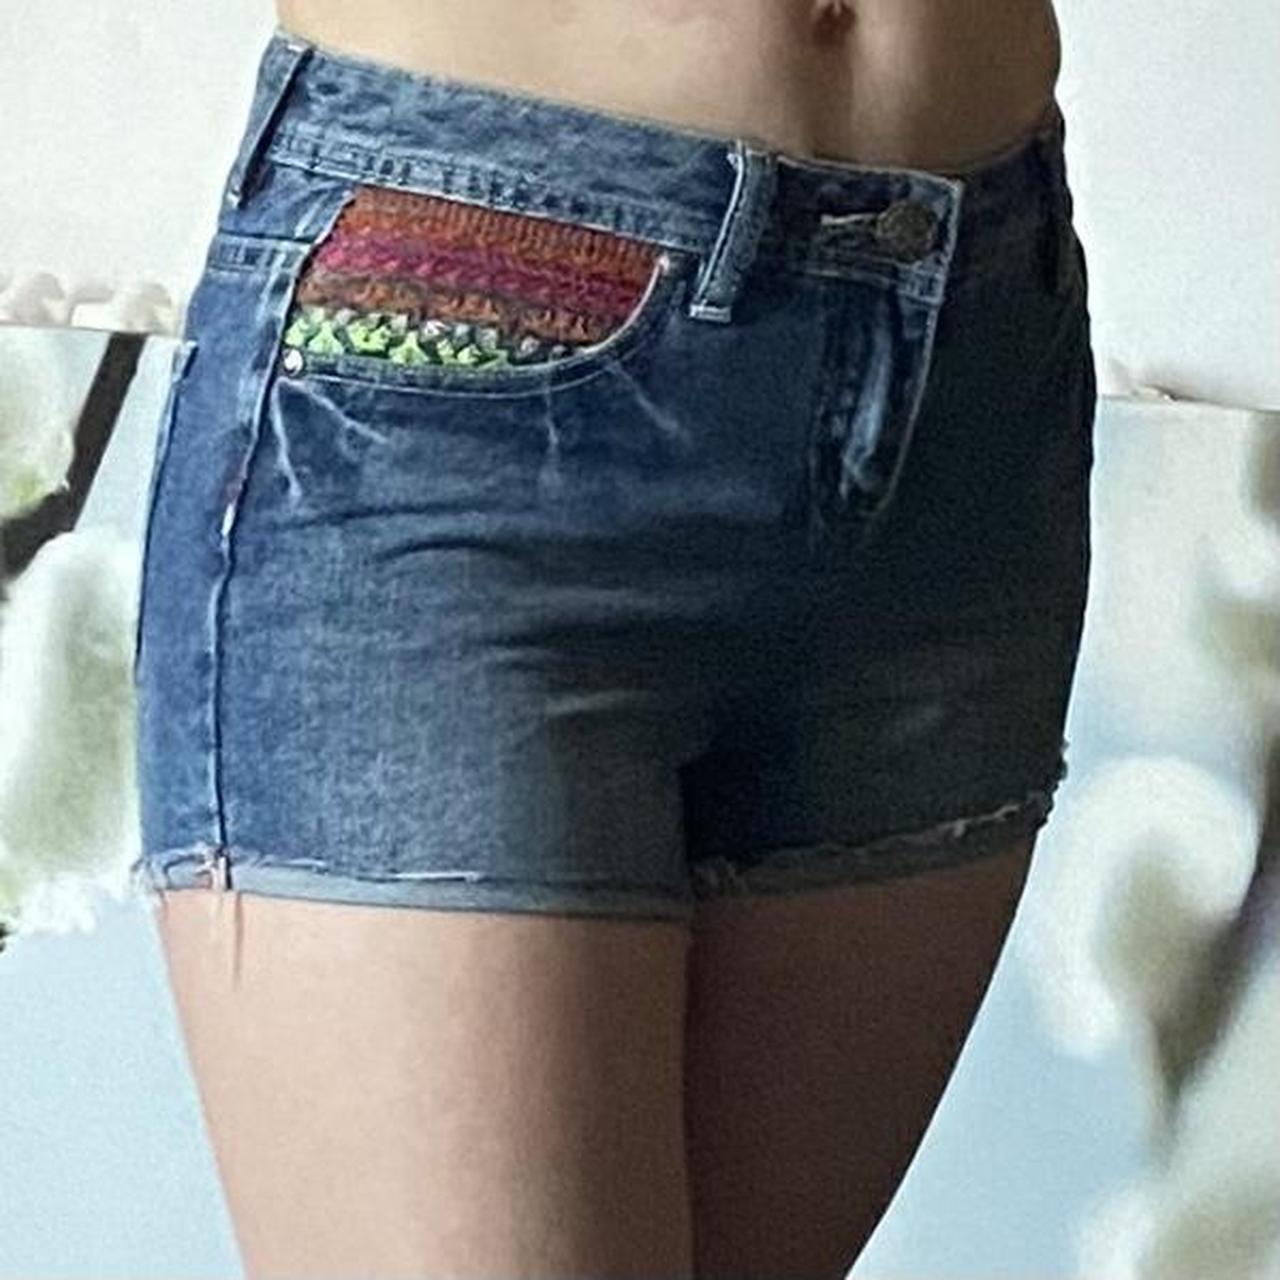 Hot Pants Are Fall's Hottest Trend